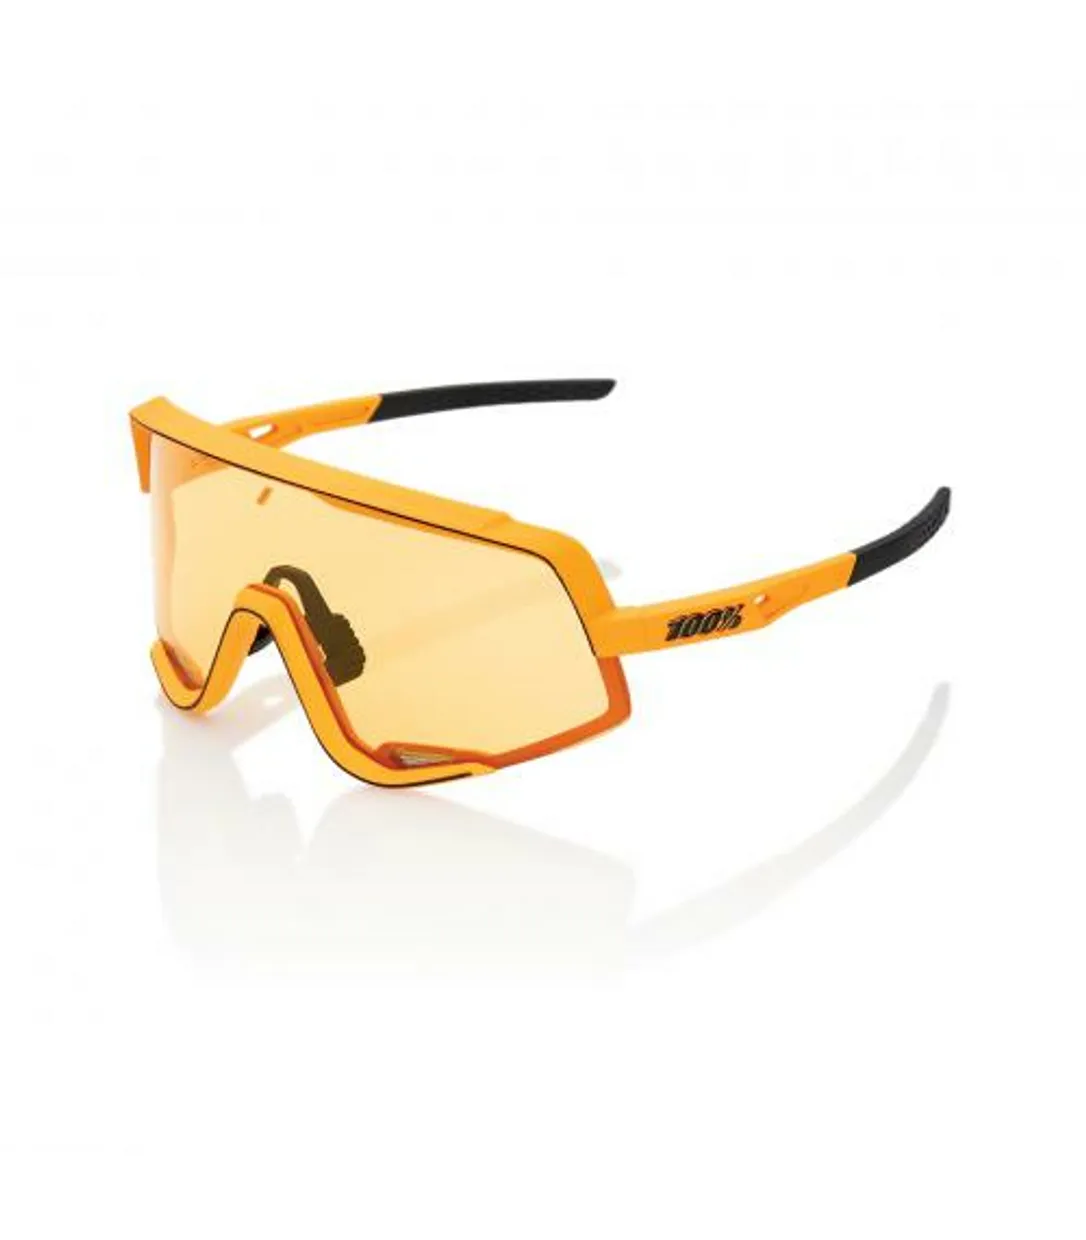 Glendale Soft Tact Mustard/ Yellow Lens + Clear Lens